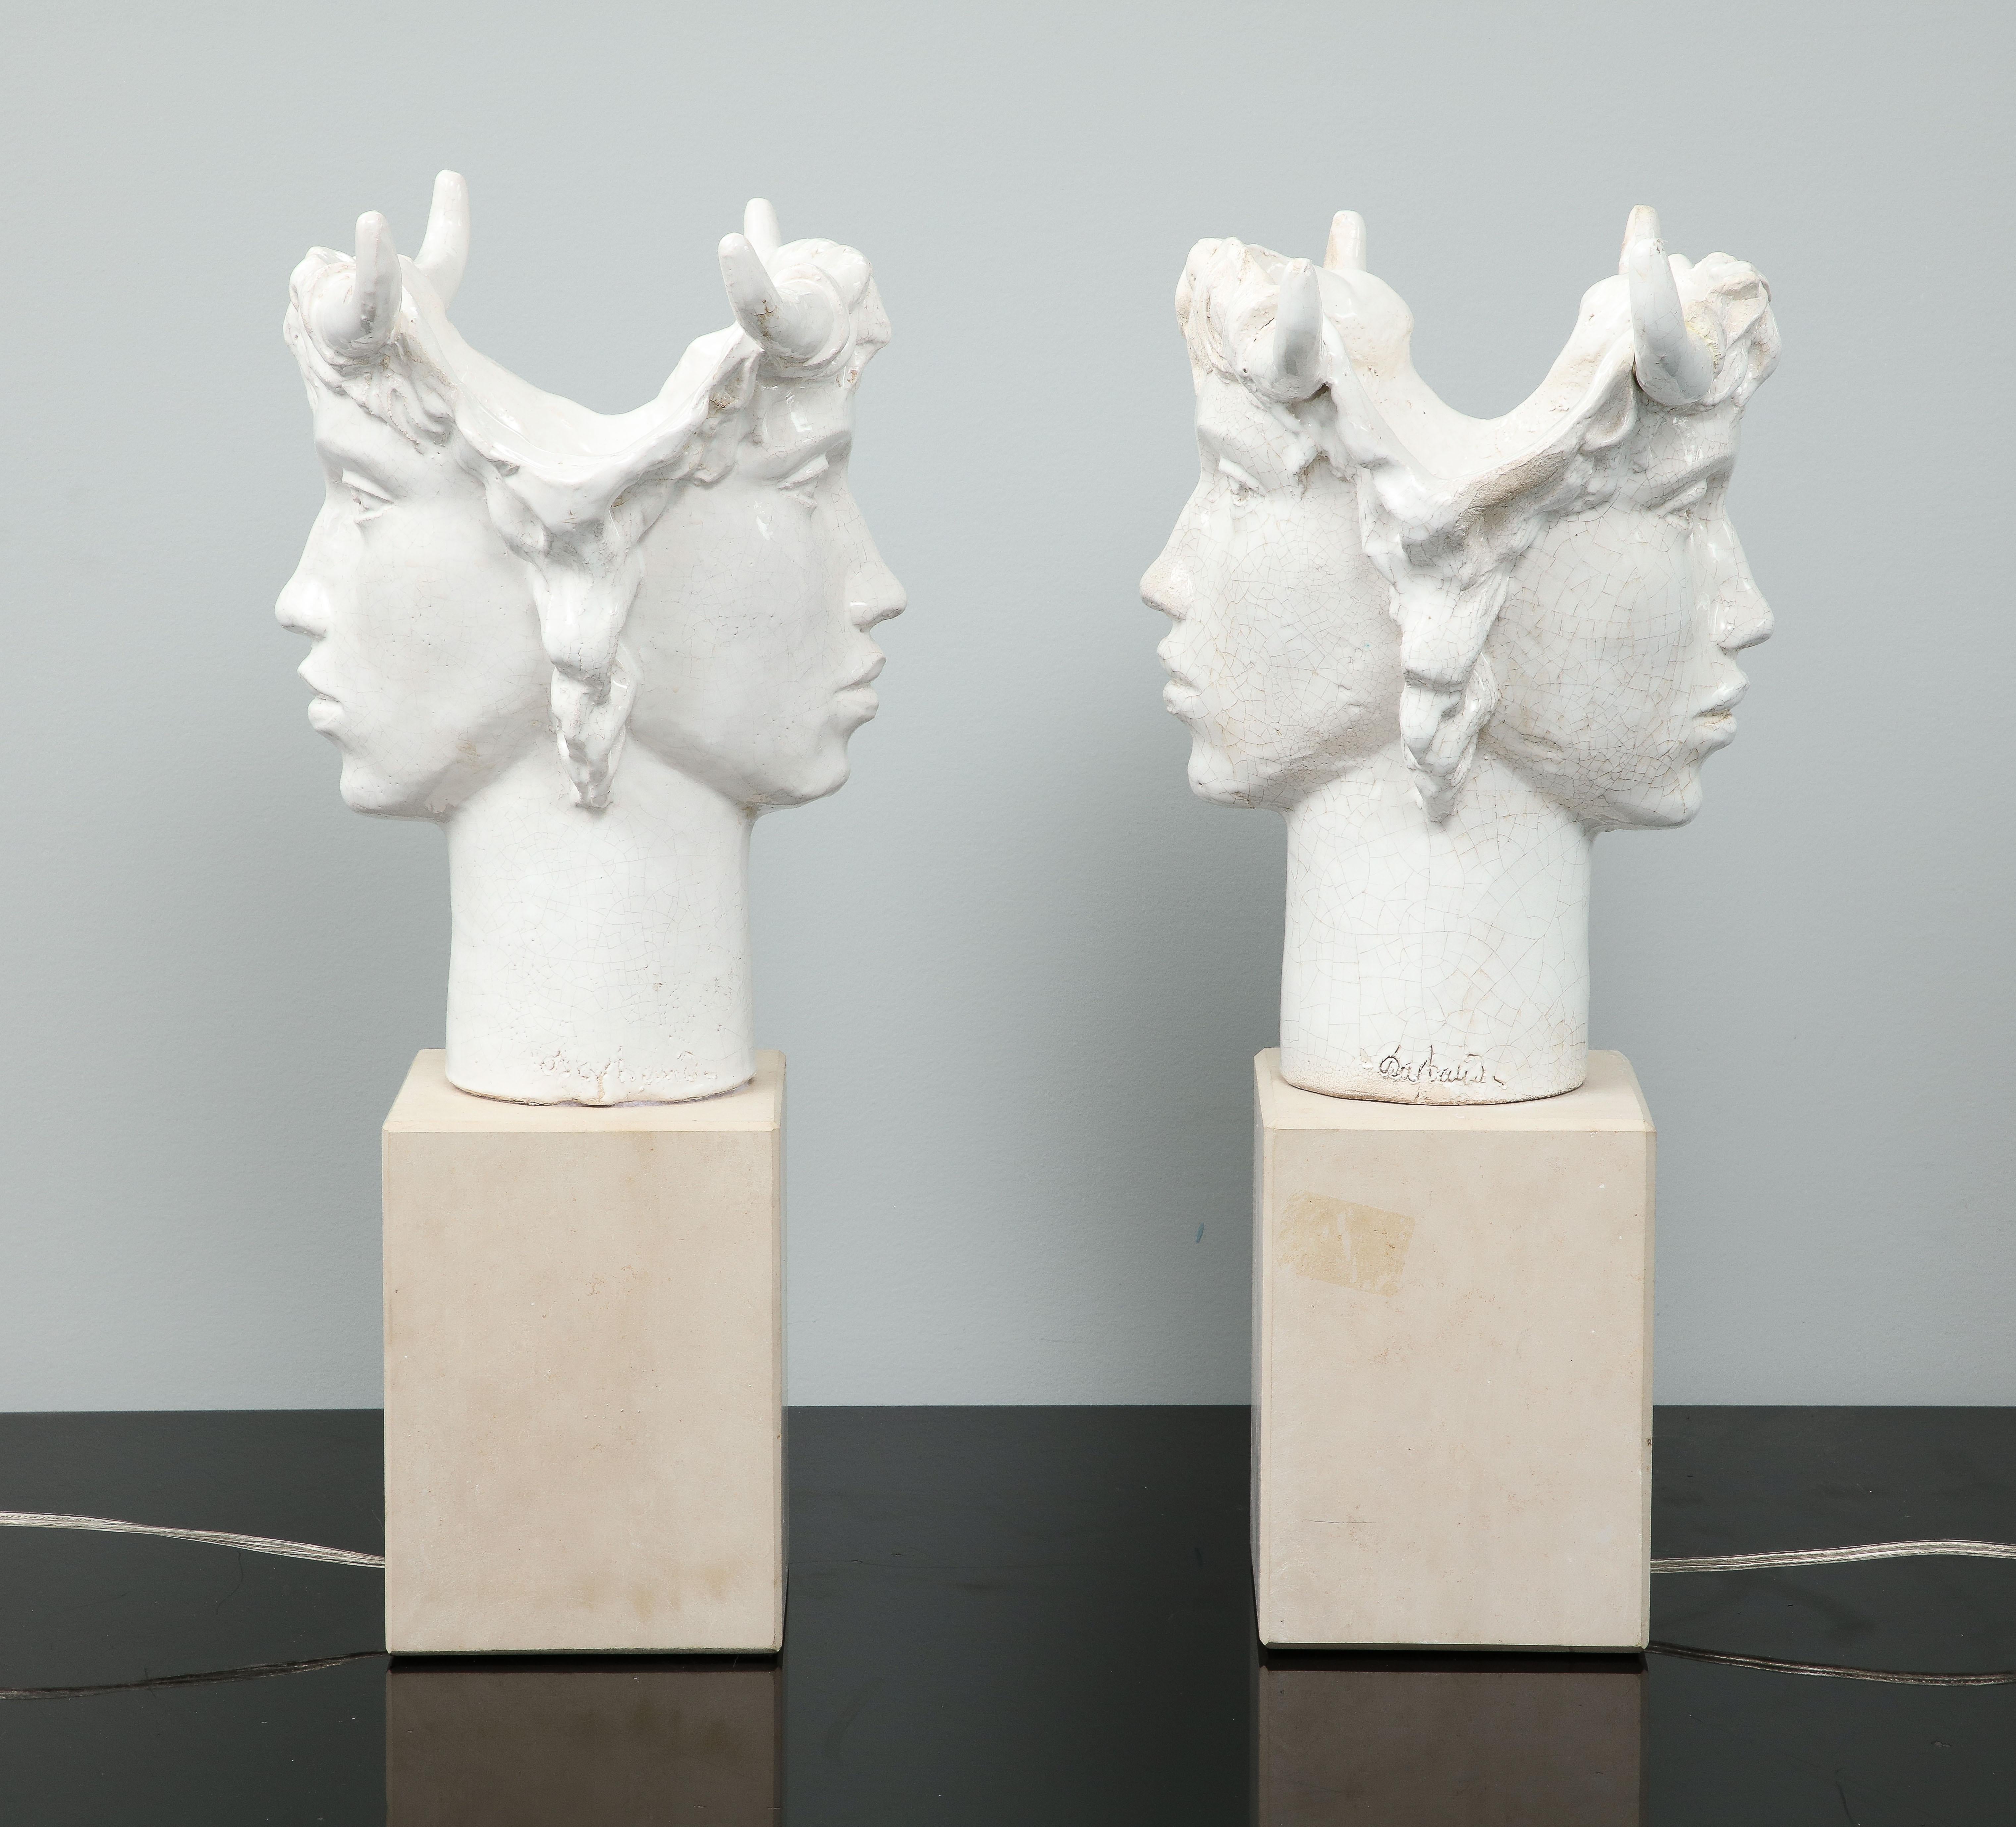 Jacques Darbaud was born in 1943 in Aix en Provence. This pair of lamps is one of his latest creation. He named it Janus in reference of the god of doors,   transitions and duality. With these 2 faces, these lamps represent the duality, the two